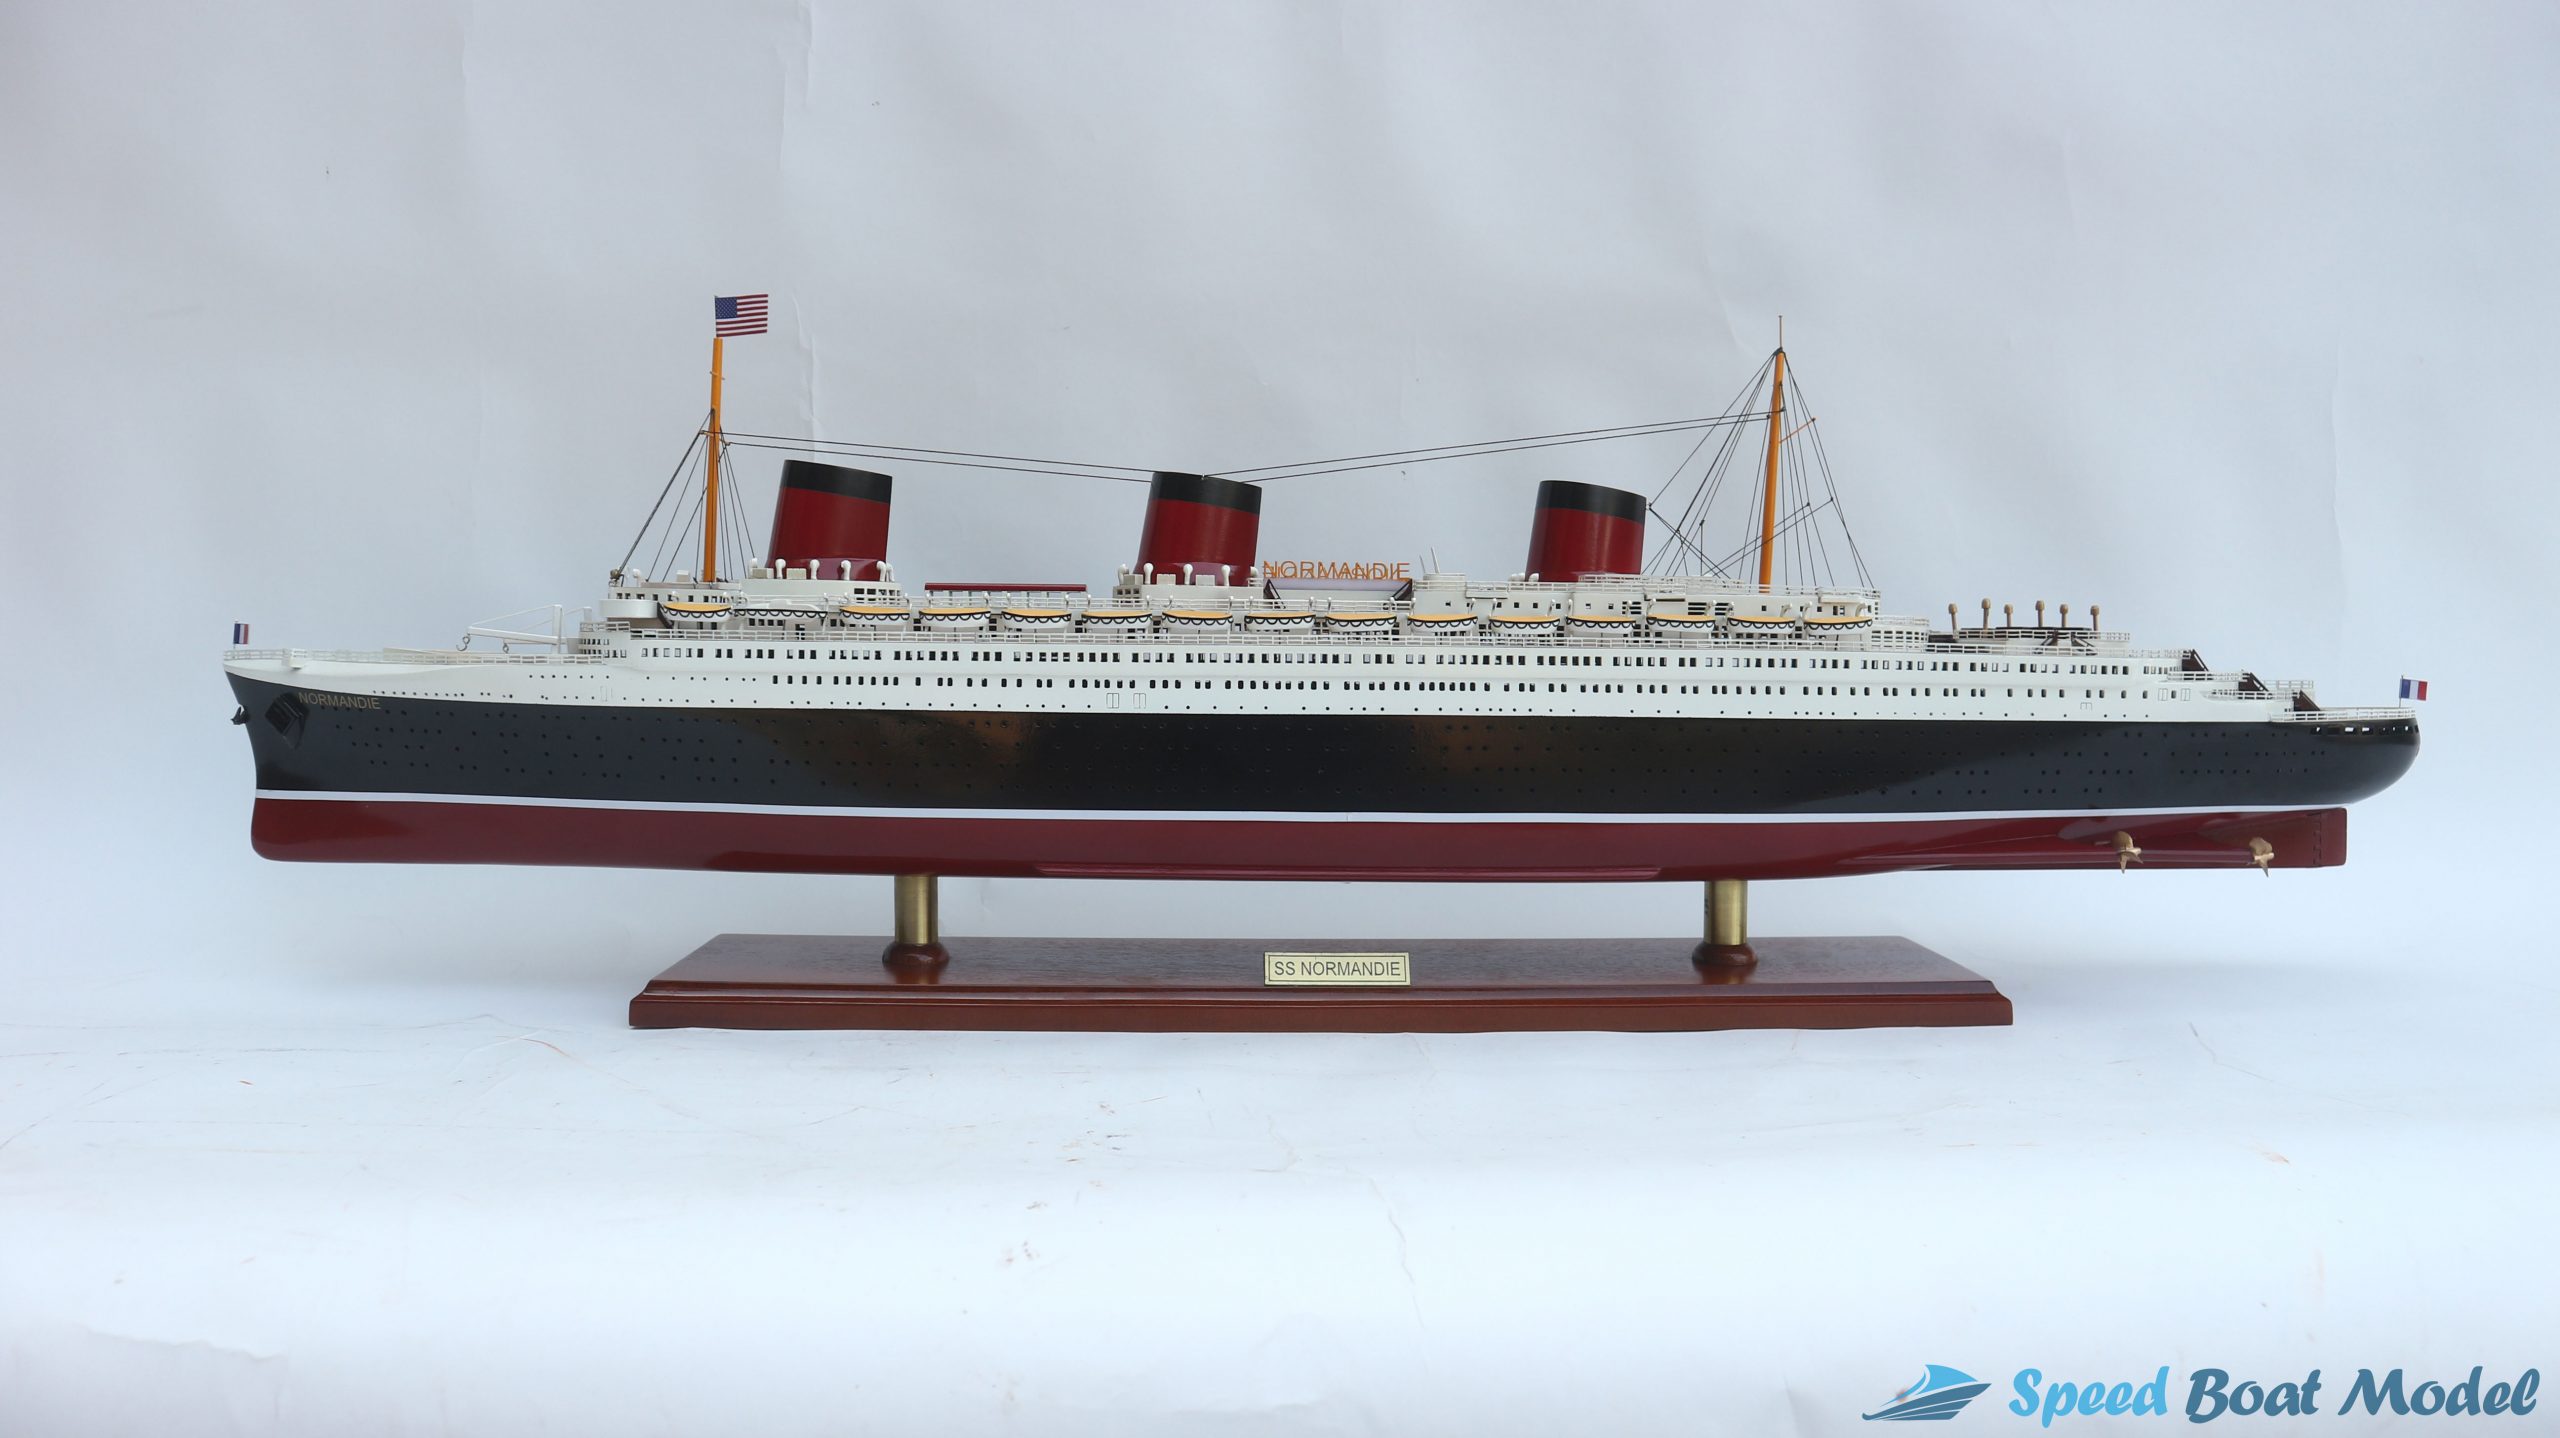 SS Normandie Cruise Ship Model